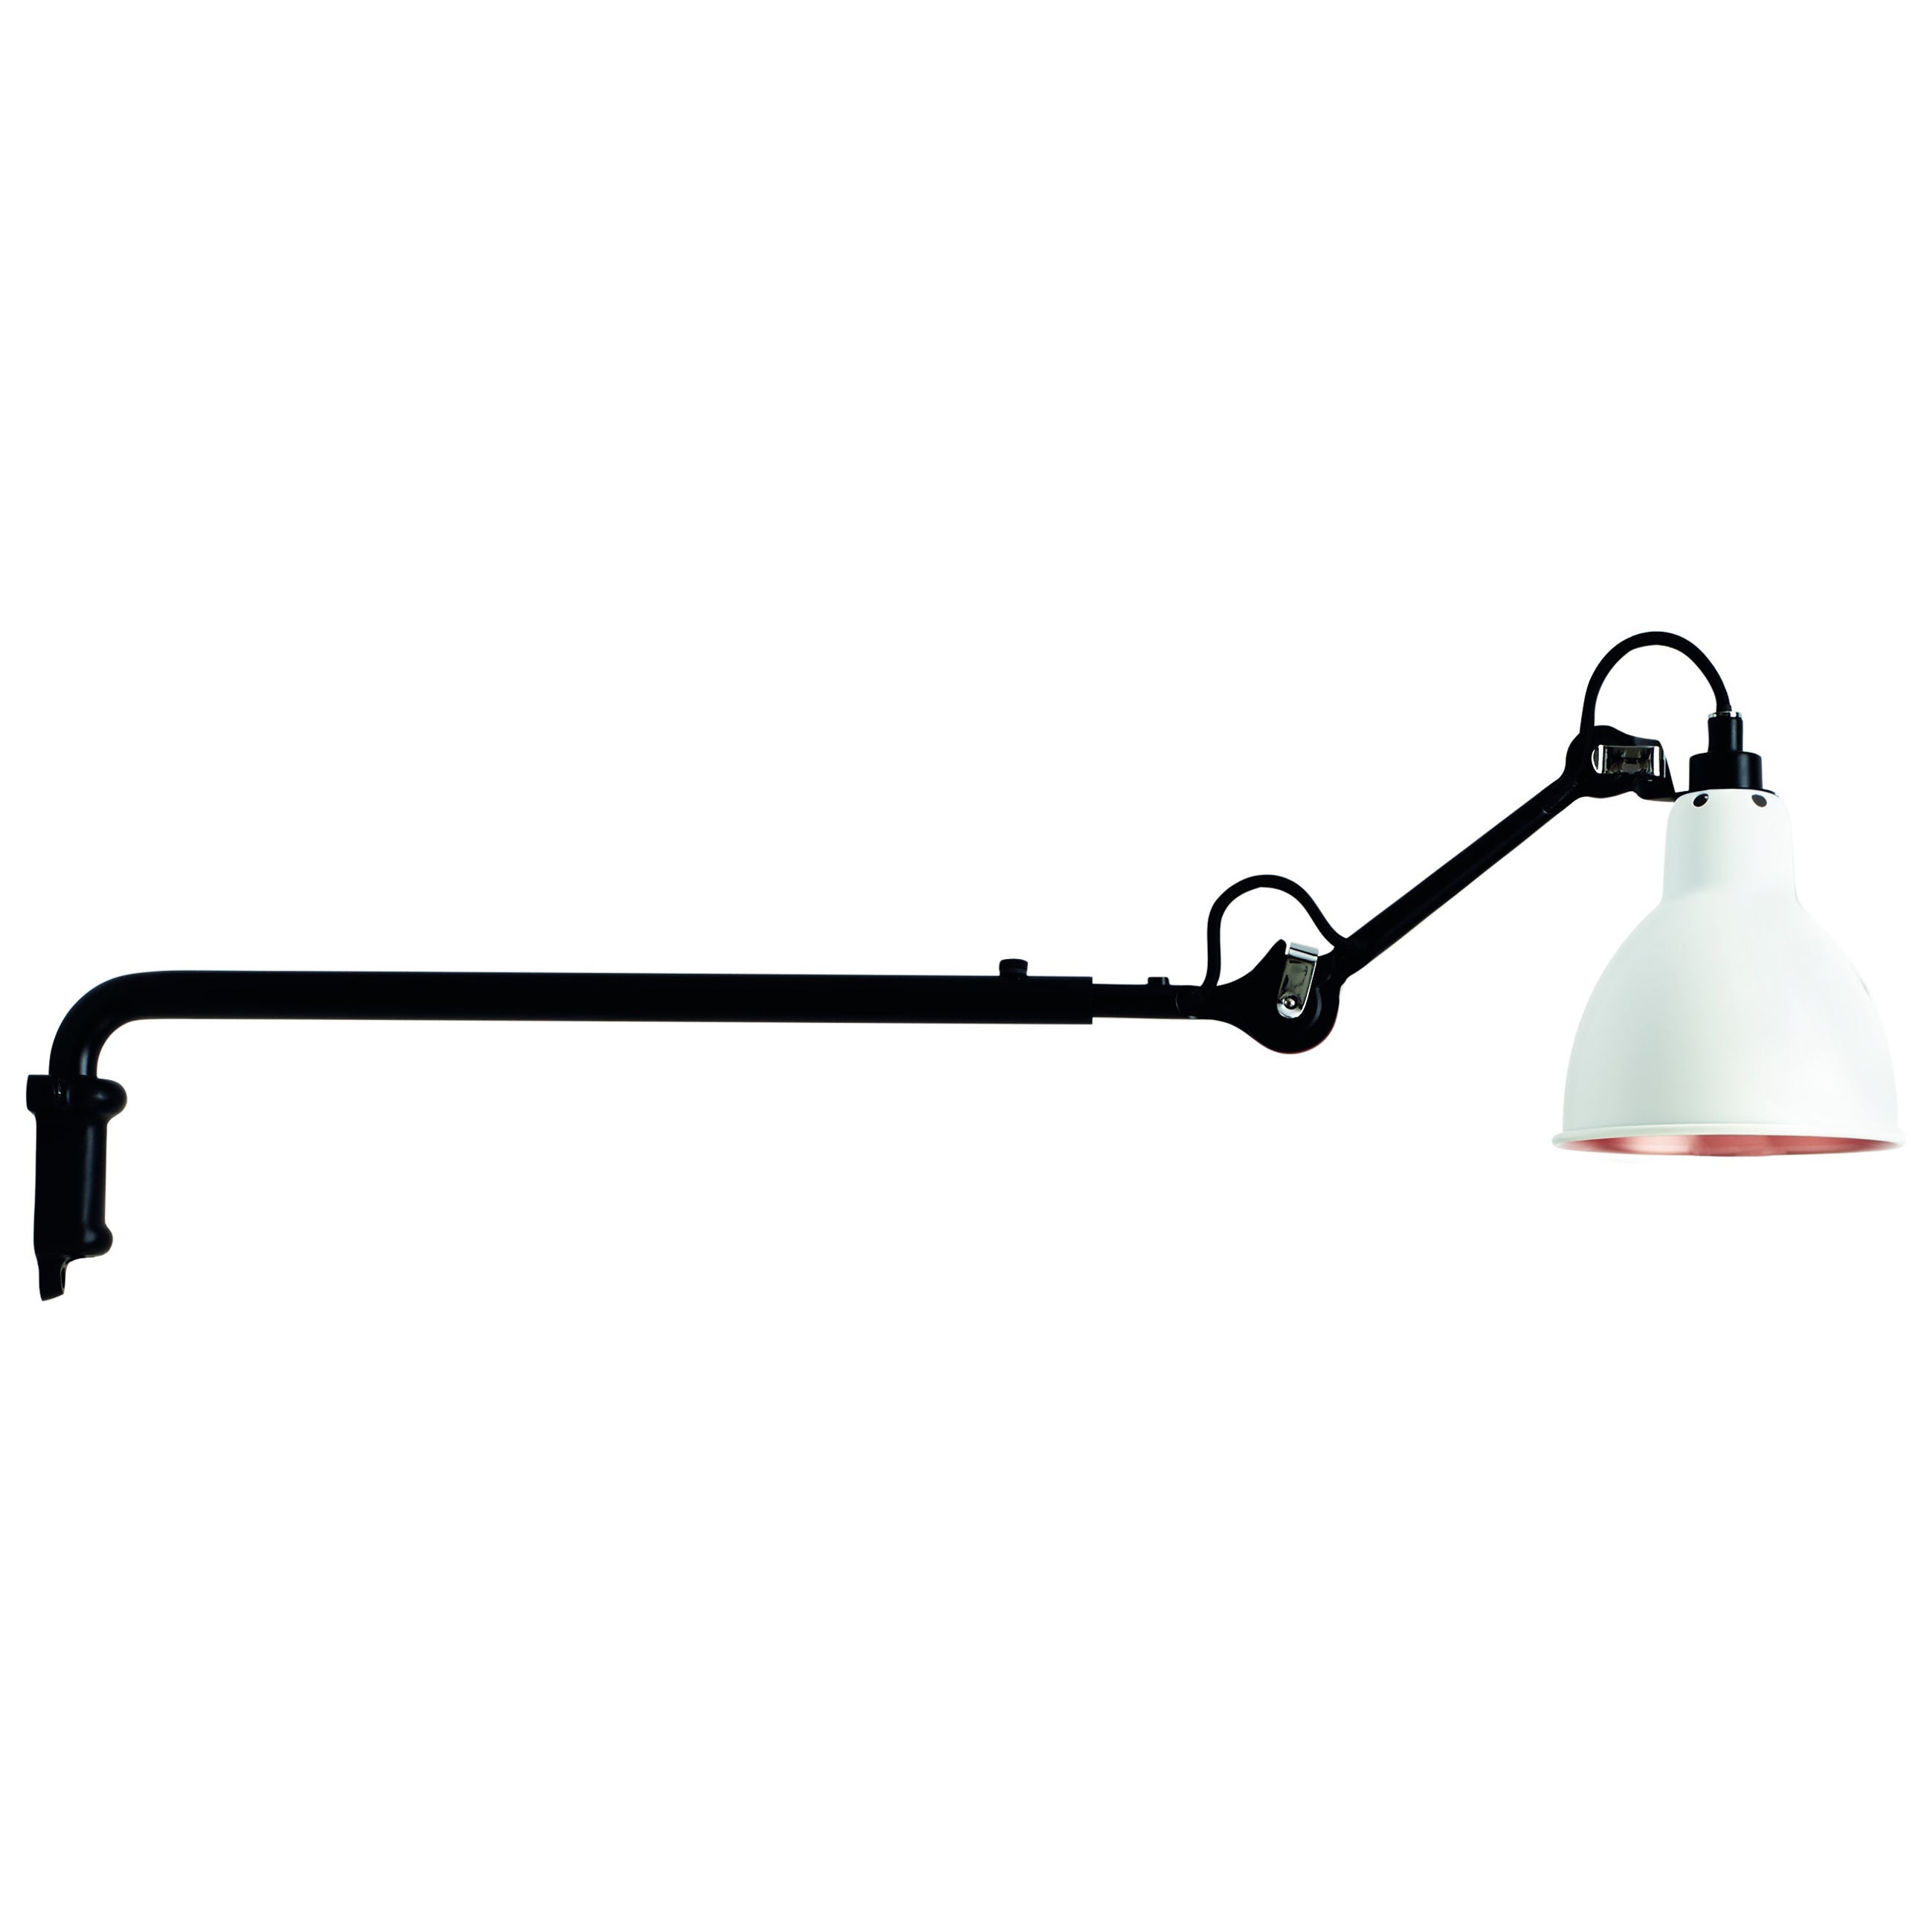 DCW Editions La Lampe Gras N°203 Wall Lamp in Black Arm & White Copper Shade For Sale